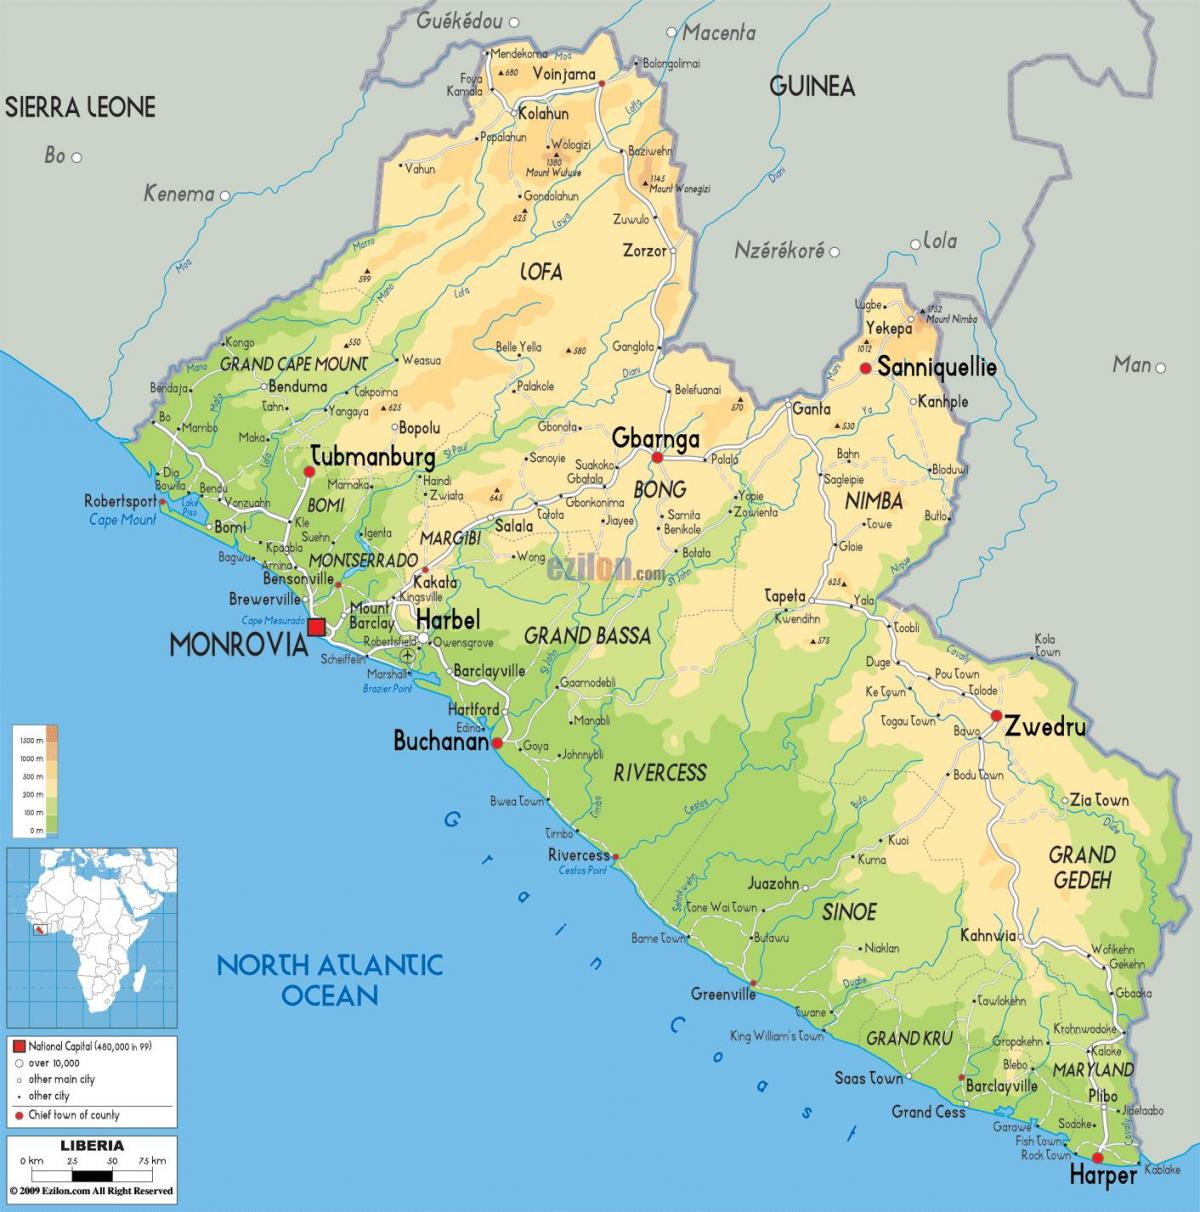 draw the map of Liberia